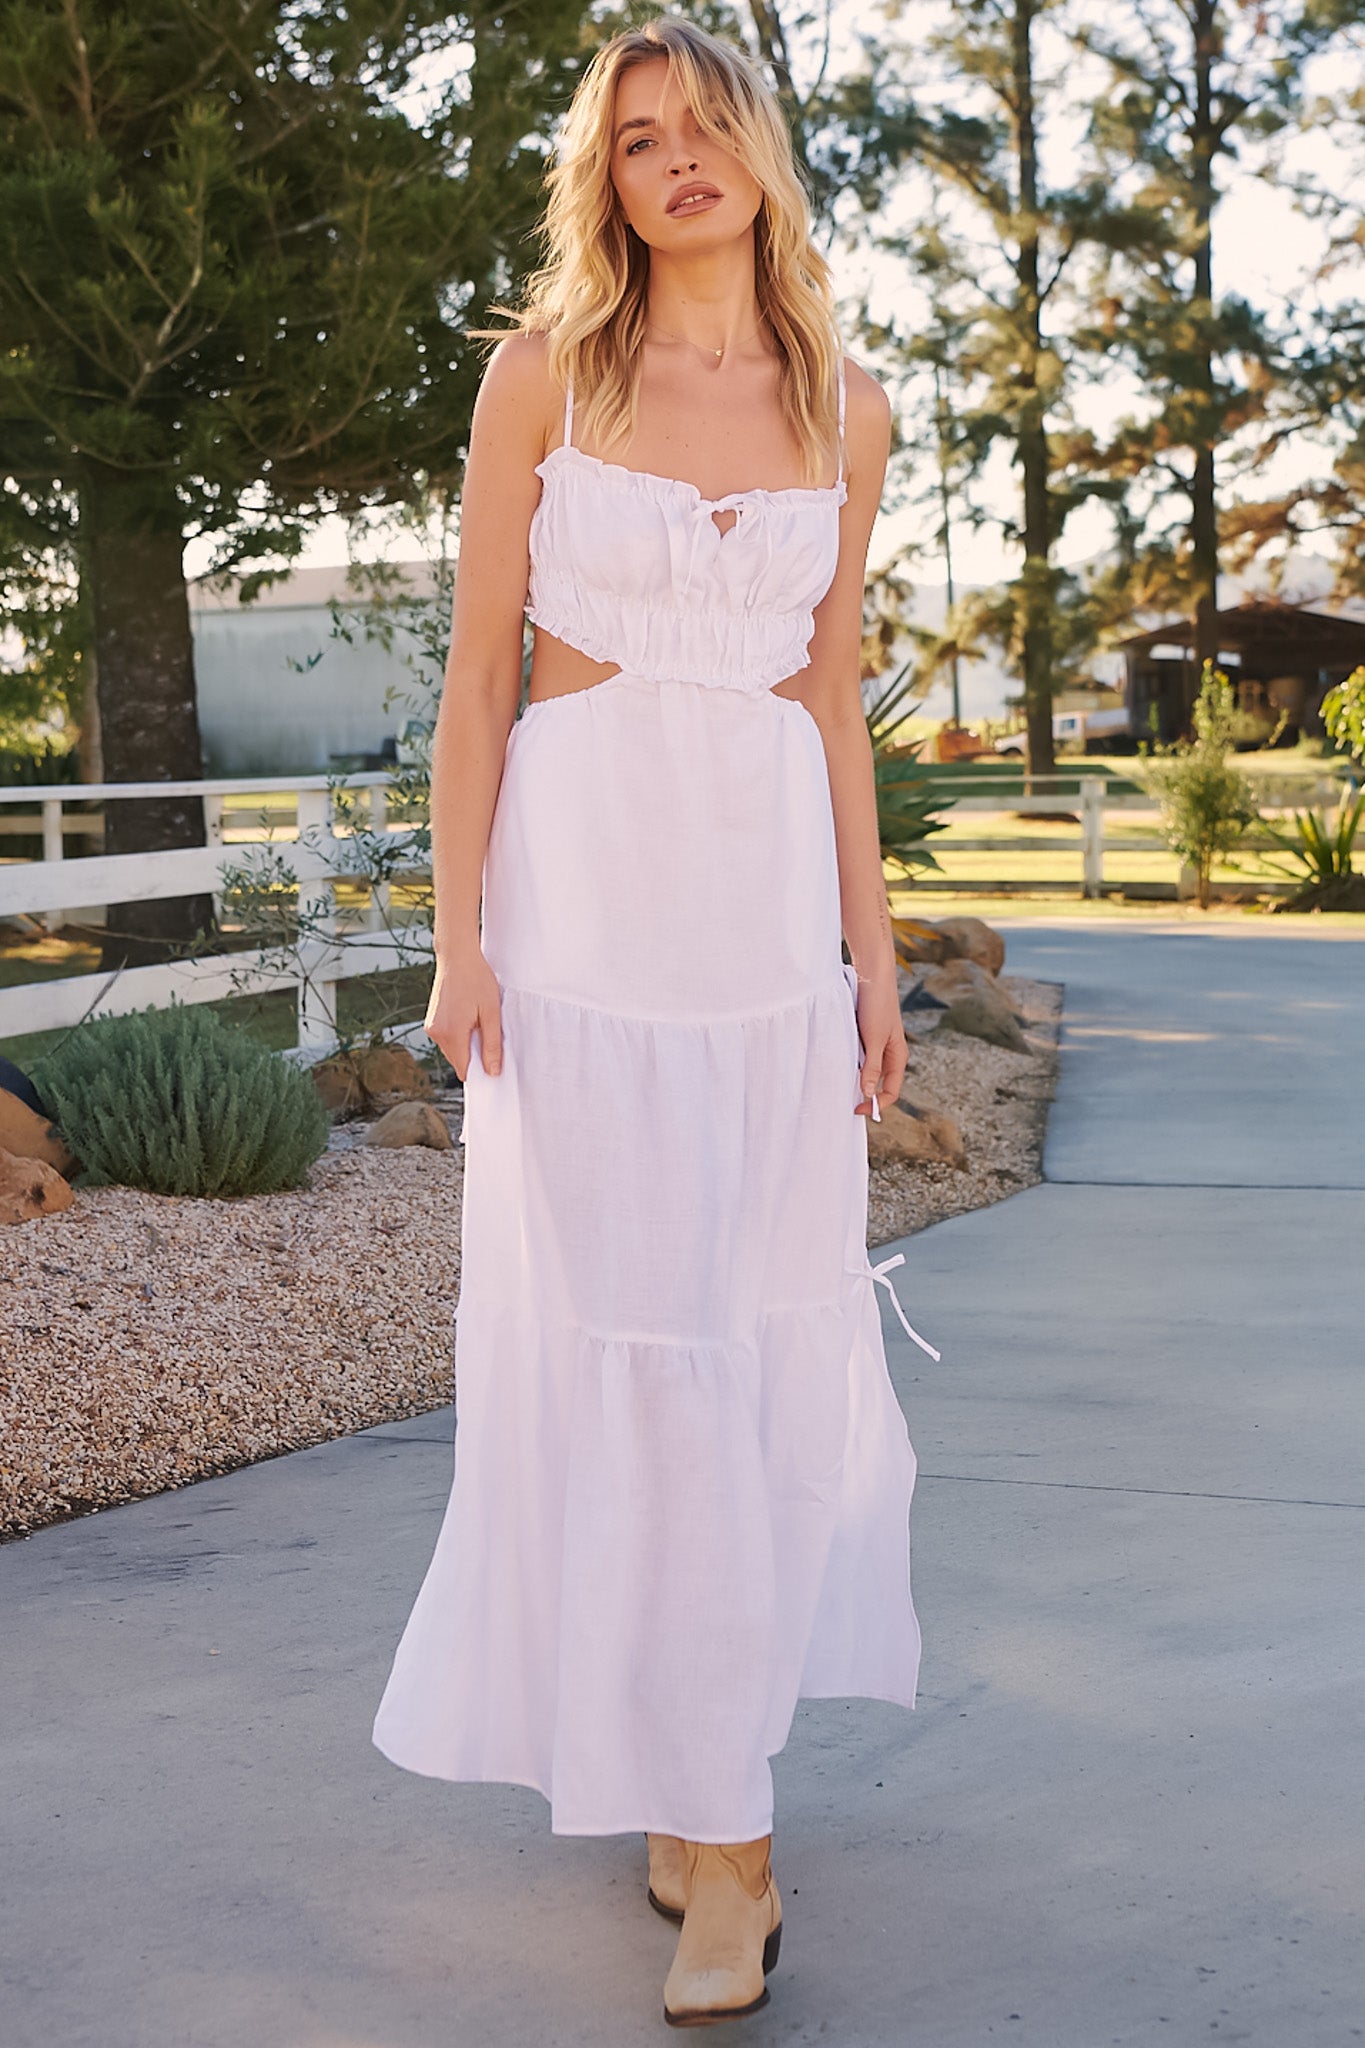 JAASE - Koda Maxi Dress: Cut Out Tiered Dress with Spaghetti Straps in White